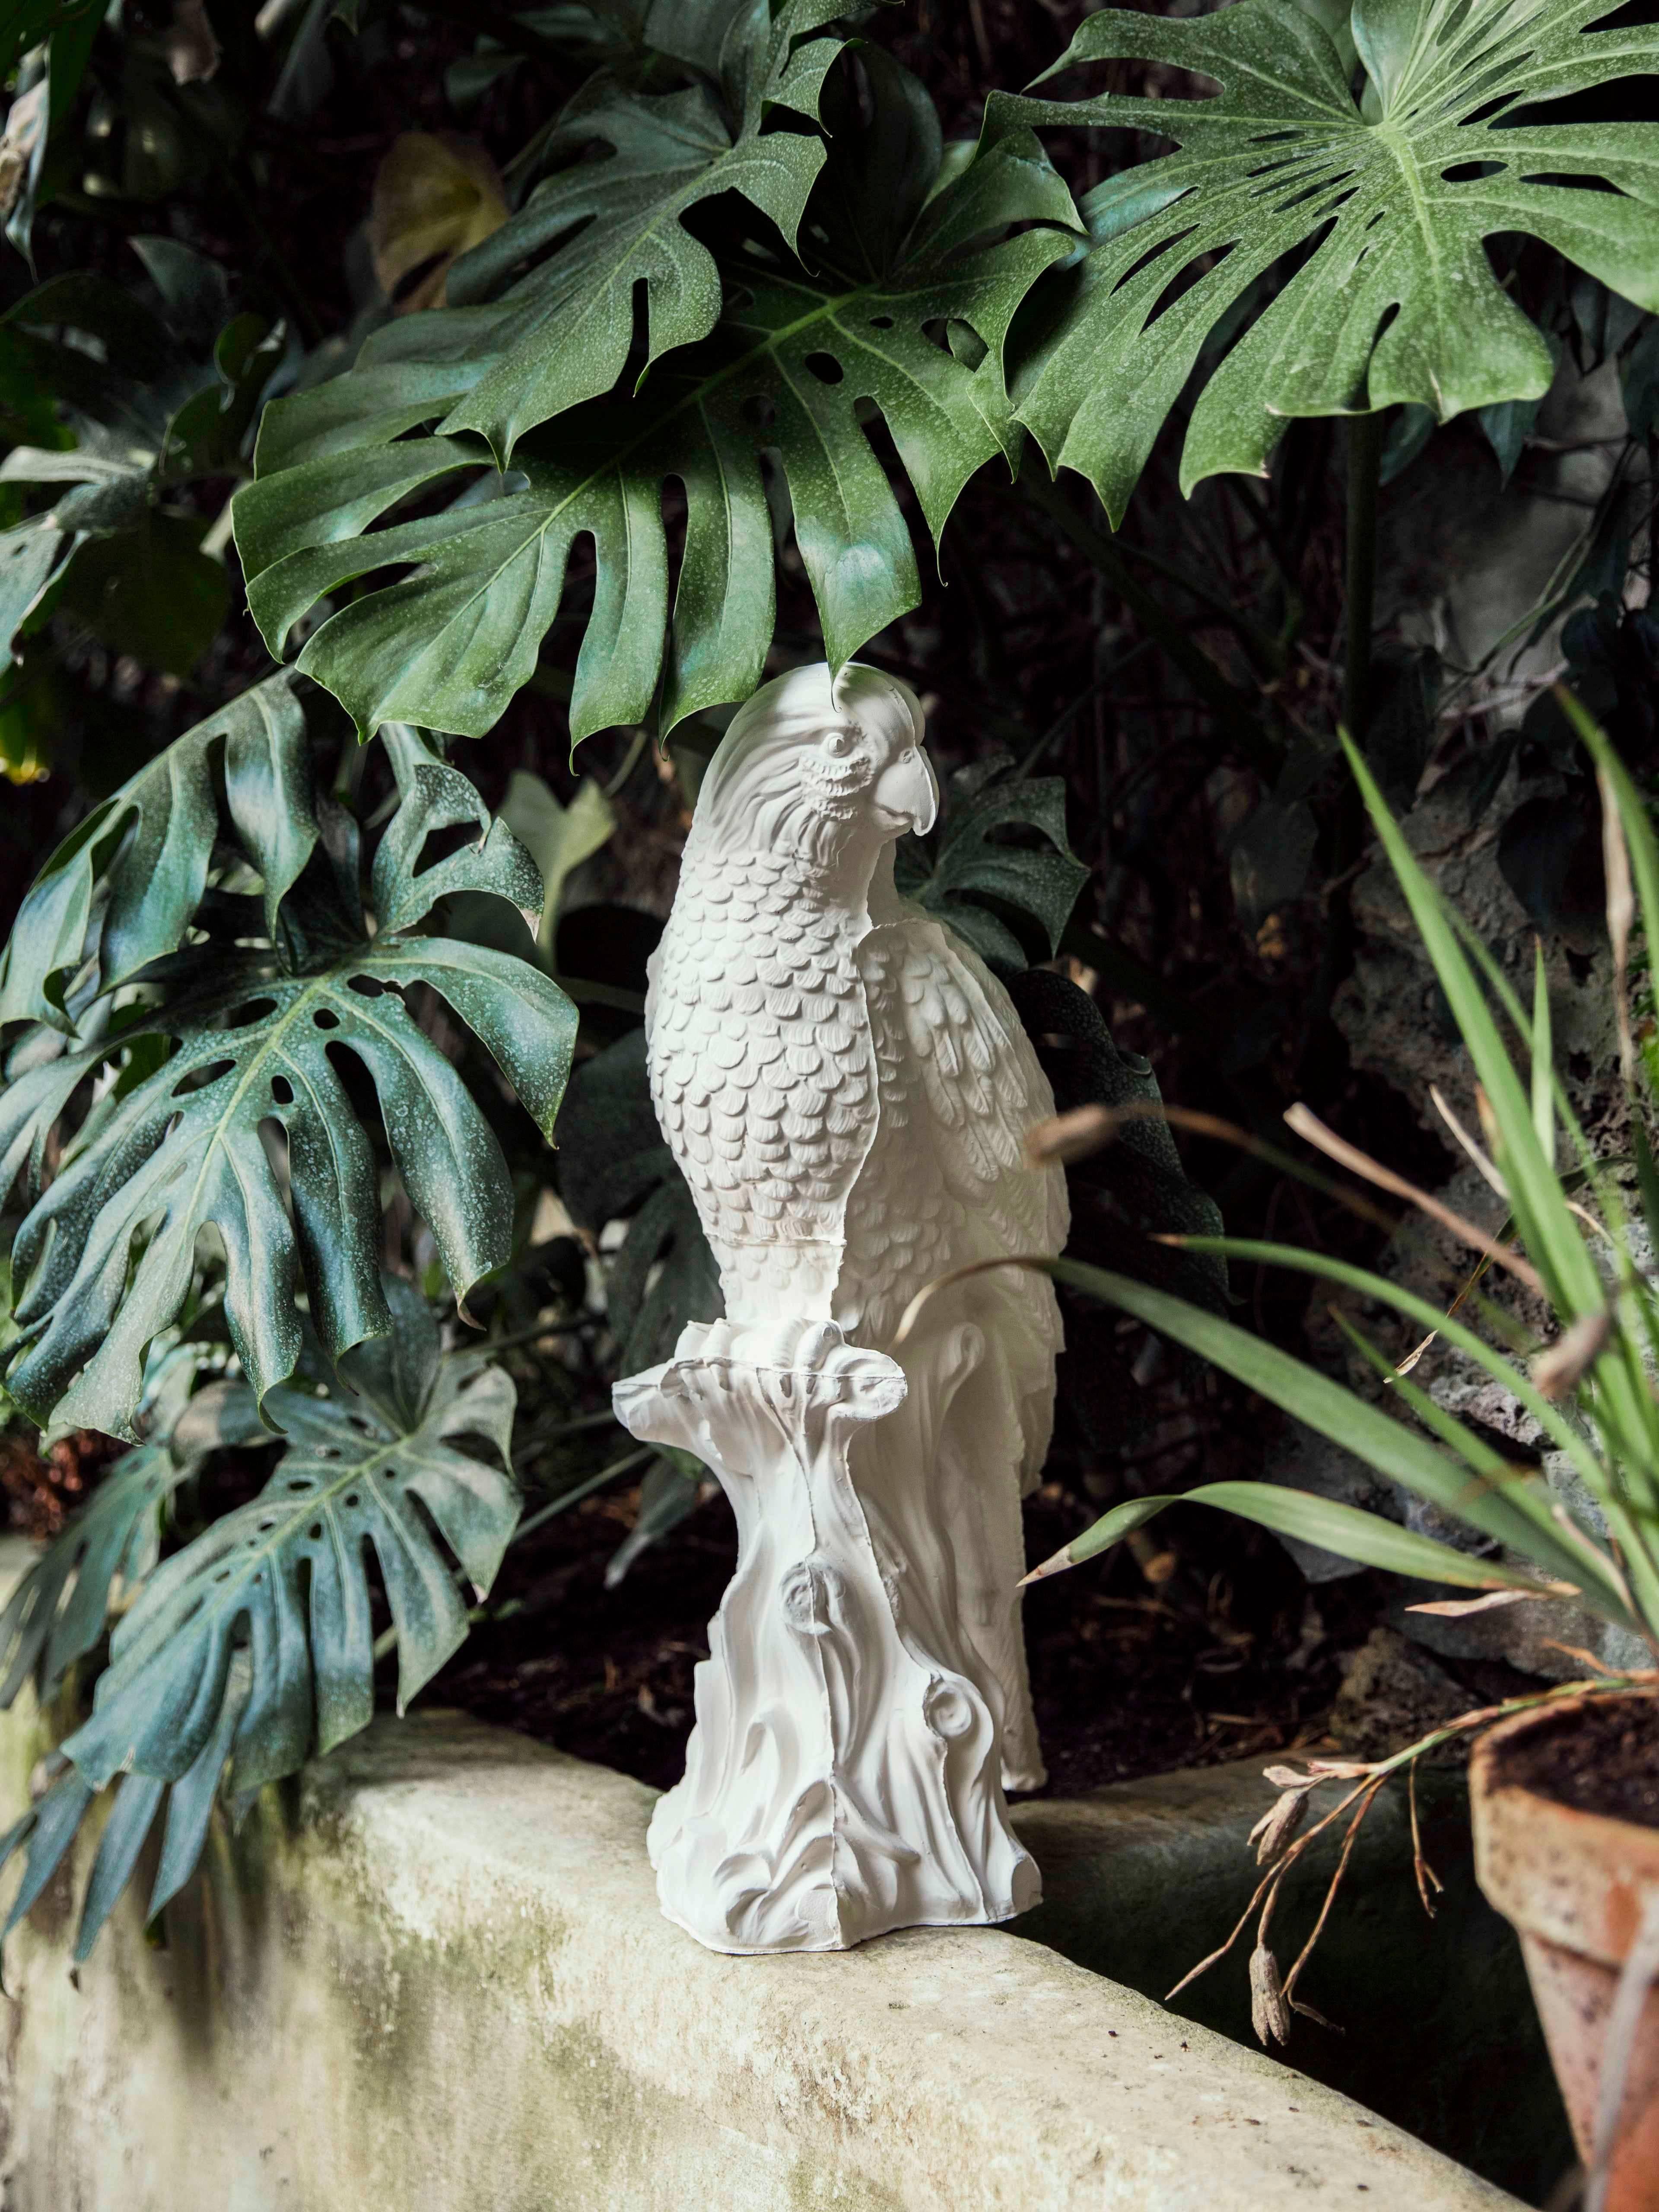 A parrot made in ceramic following the artisanal technique of casting liquid clay inside plastic mould. 
After two firing the parrot is finished with a white satin enamel. Custom color can be made on request.

Dimensions (in): W 7.8 x D 10.6 x H